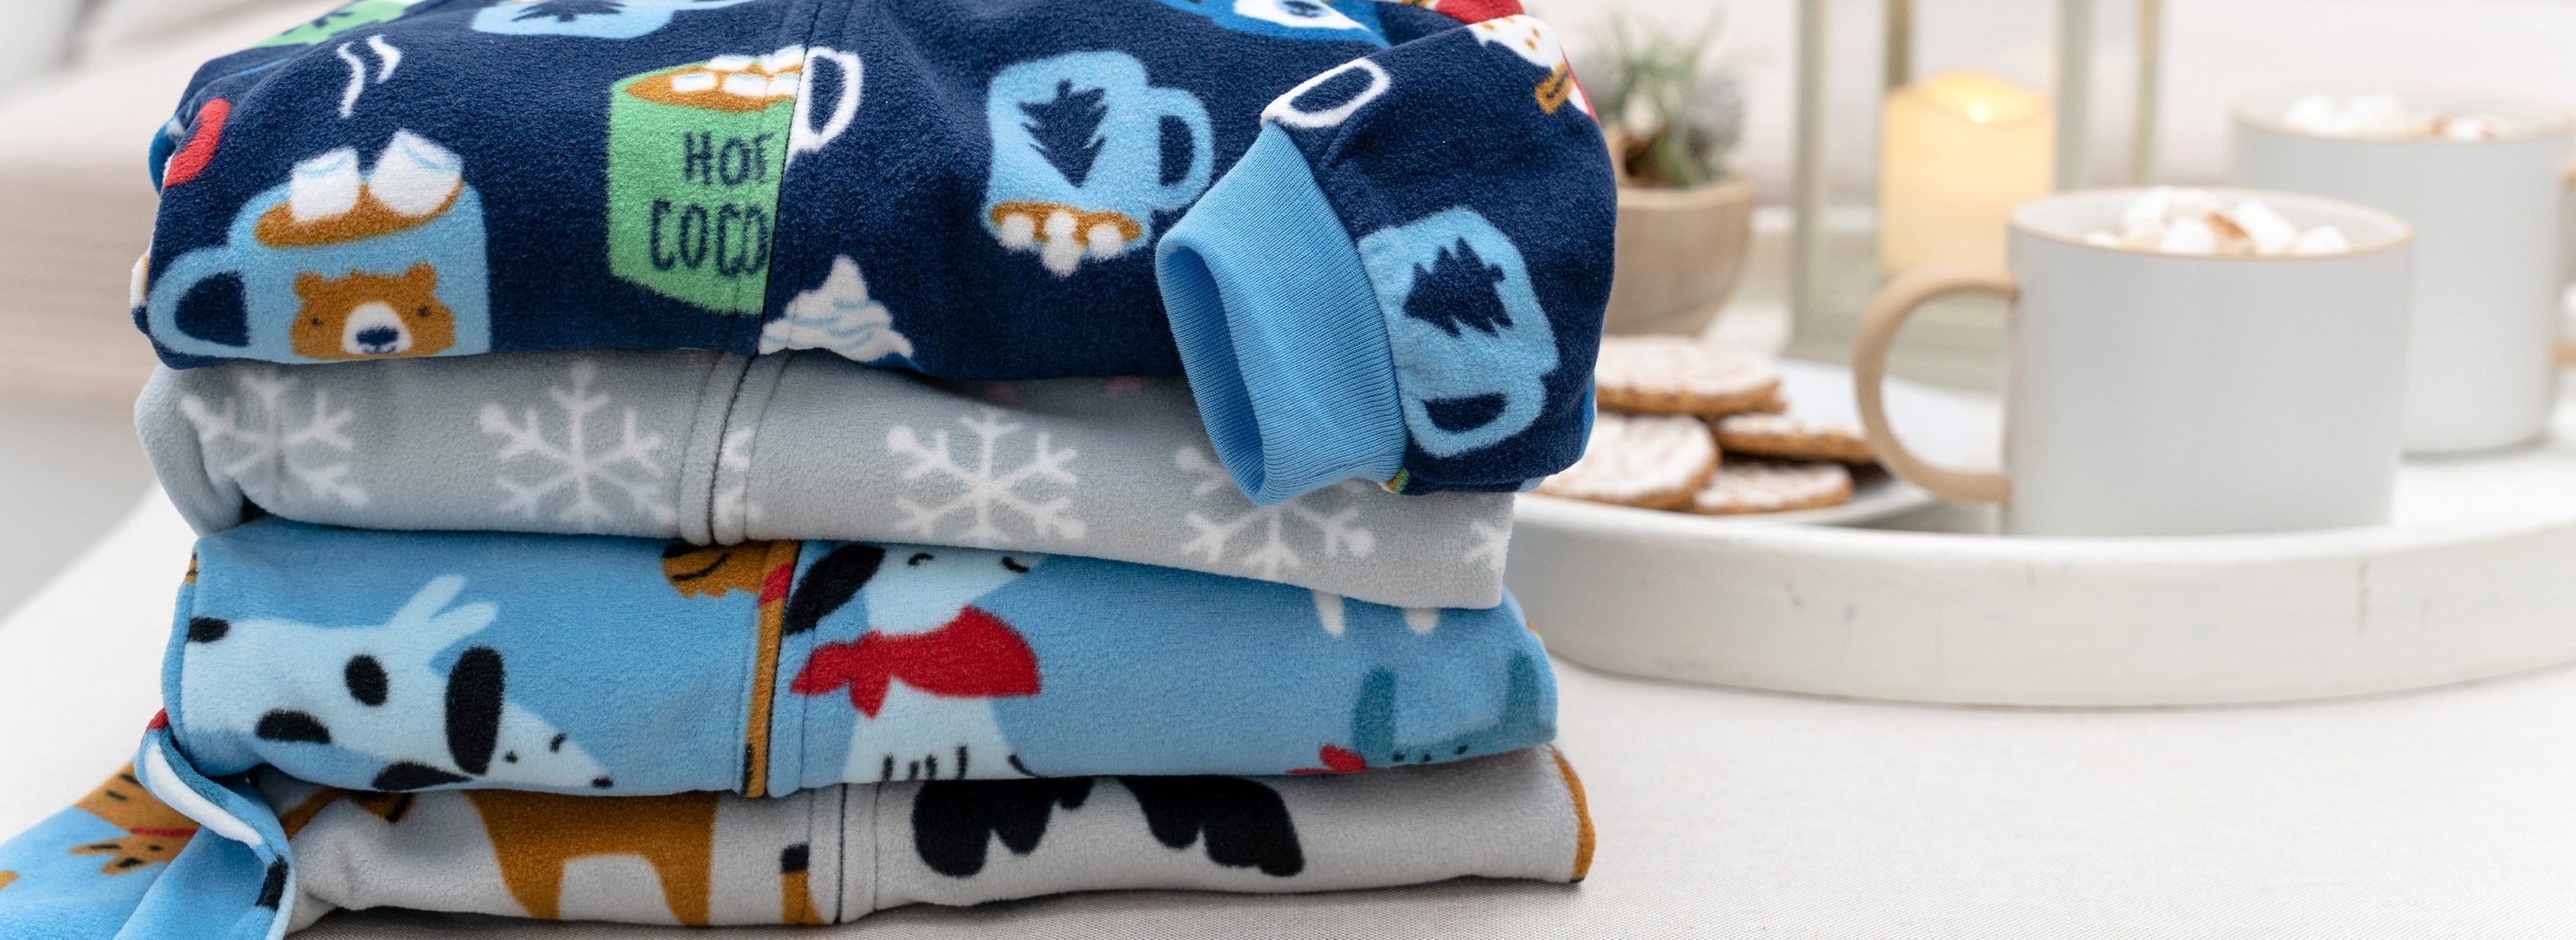 A stack of pajamas featuring adorable dogs and cats. Perfect for a cozy night's sleep.